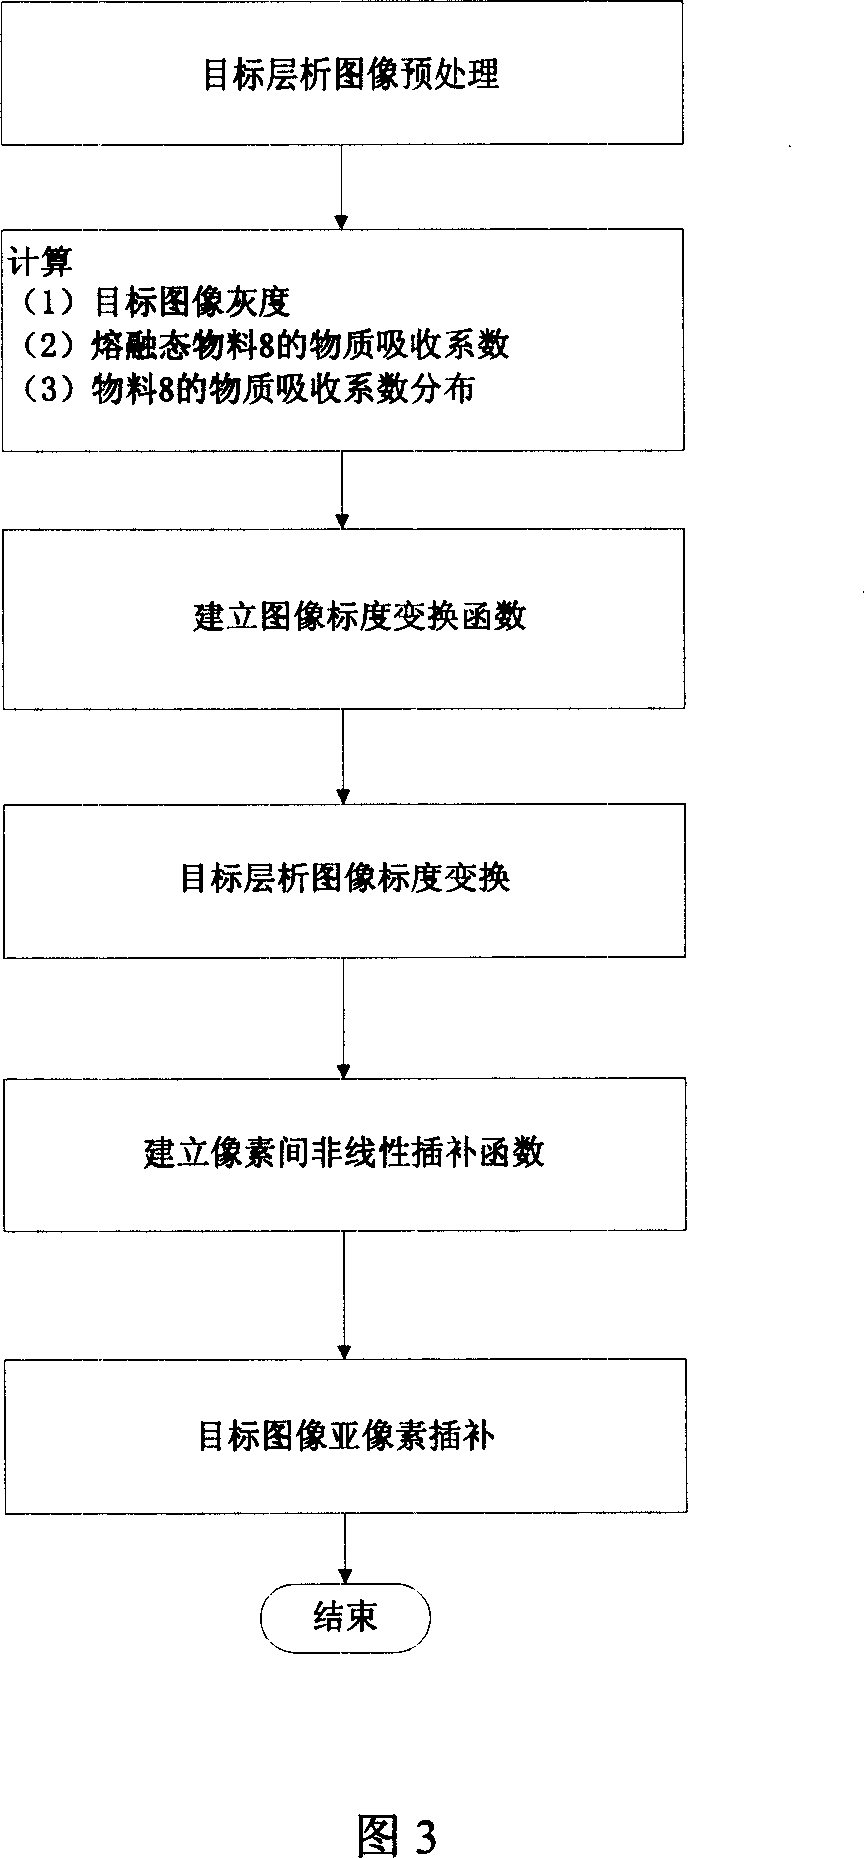 Tomographic image measuring method for shape of closed melting state material